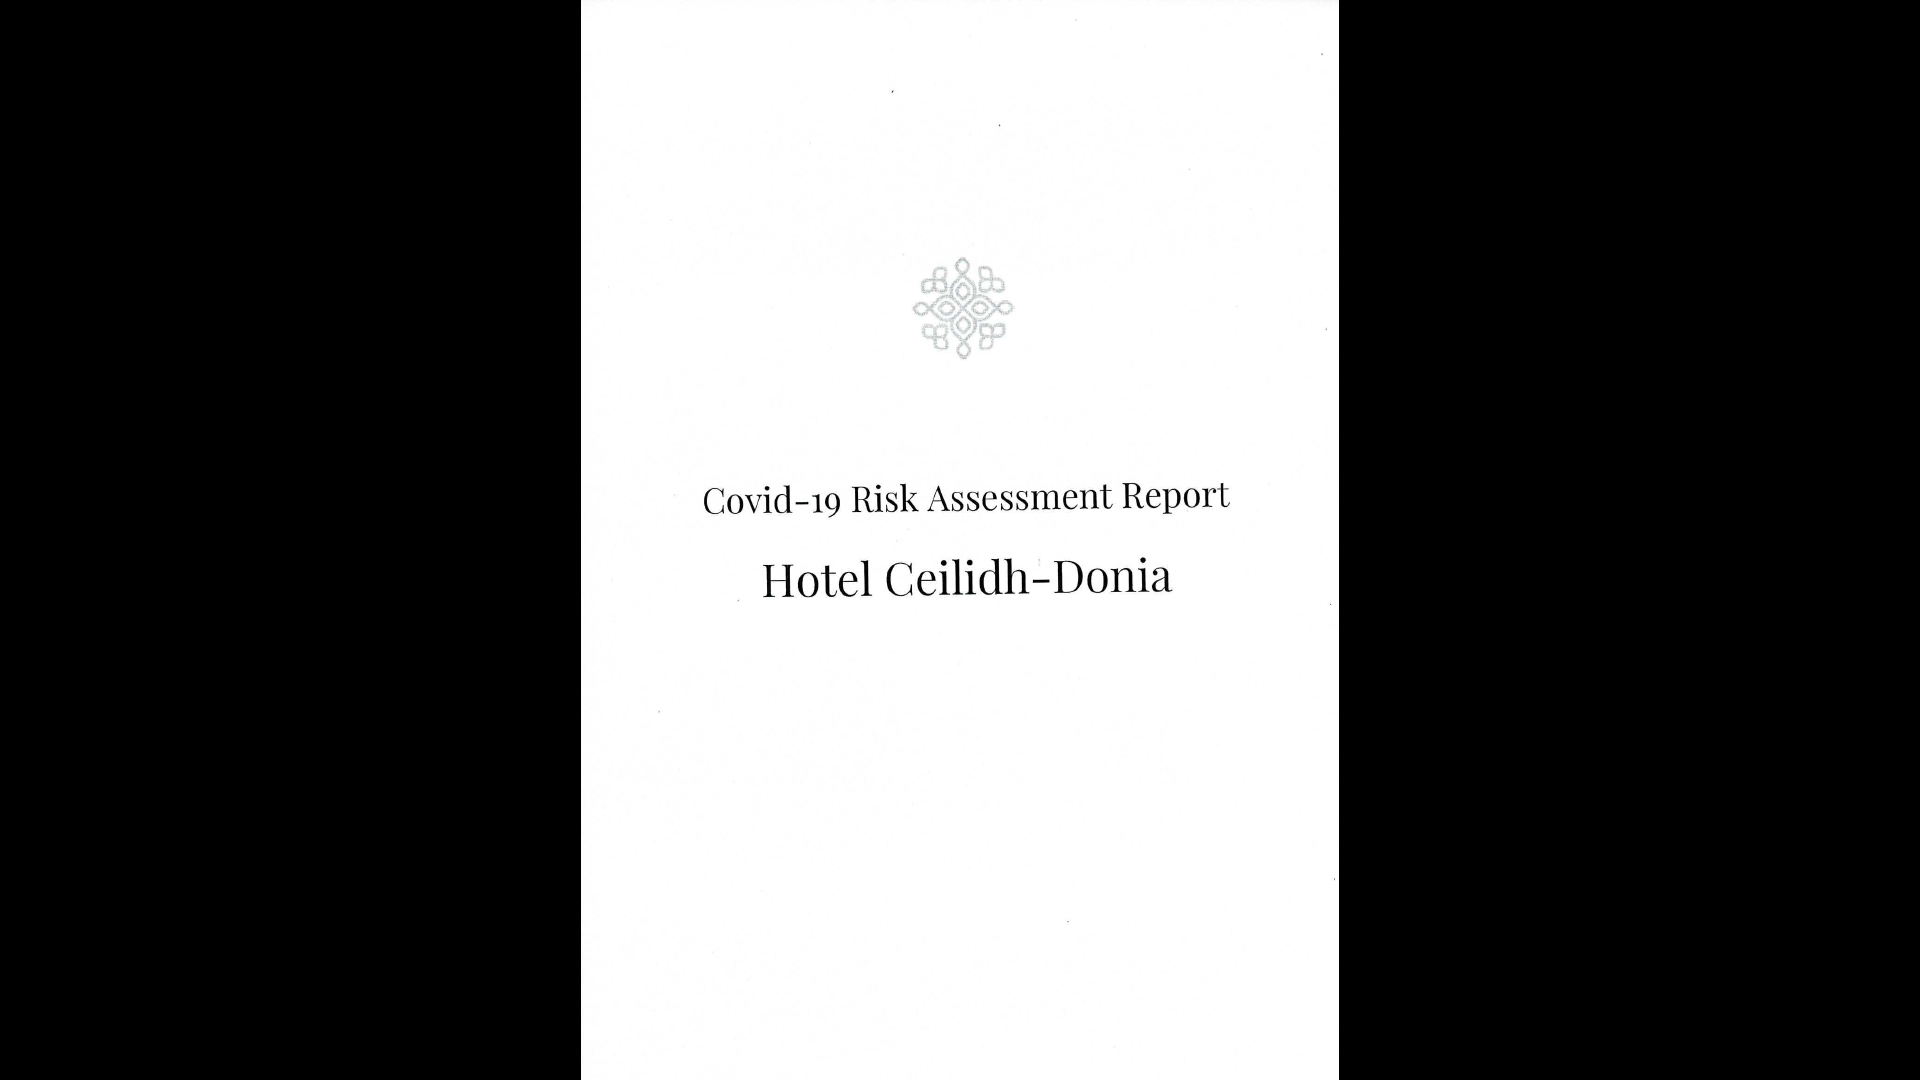 Staying at the Hotel Ceilidh-Donia during Covid-19